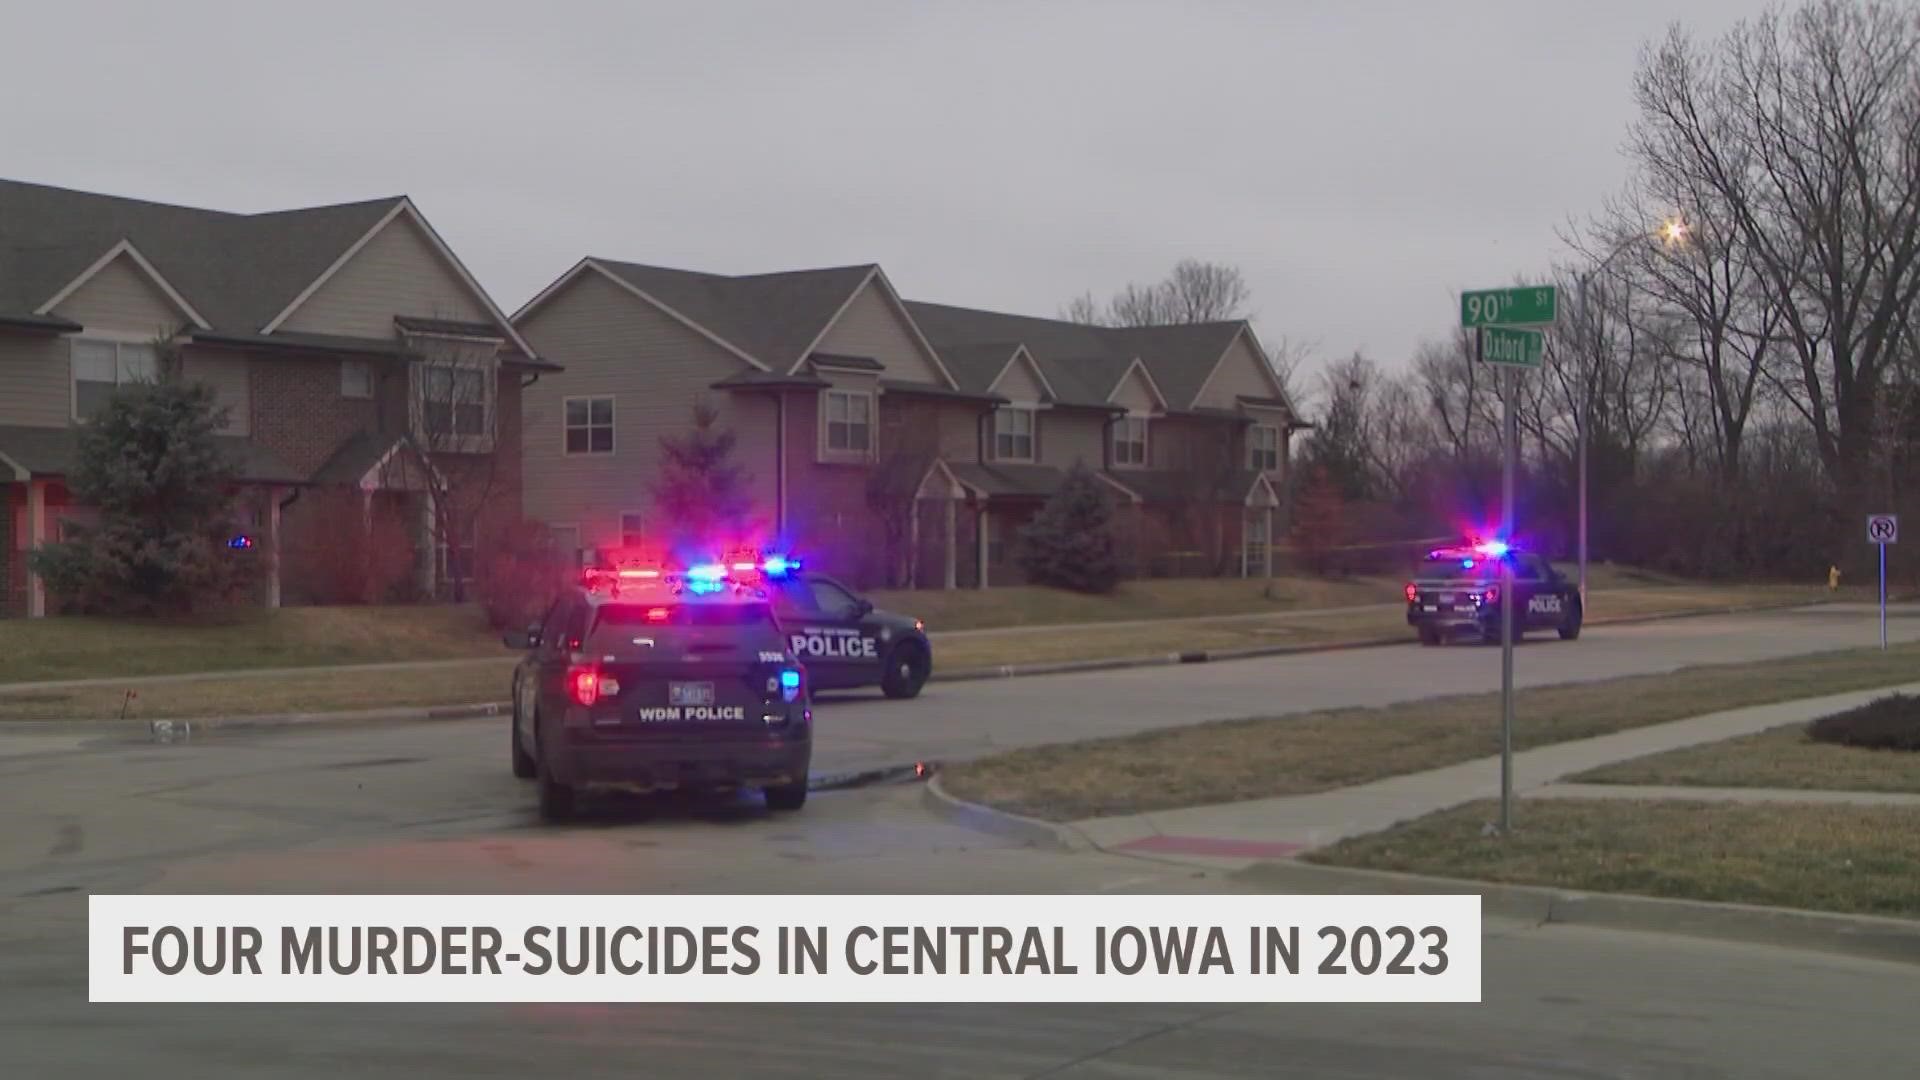 There have four murder-suicides in central Iowa since the start of 2023.